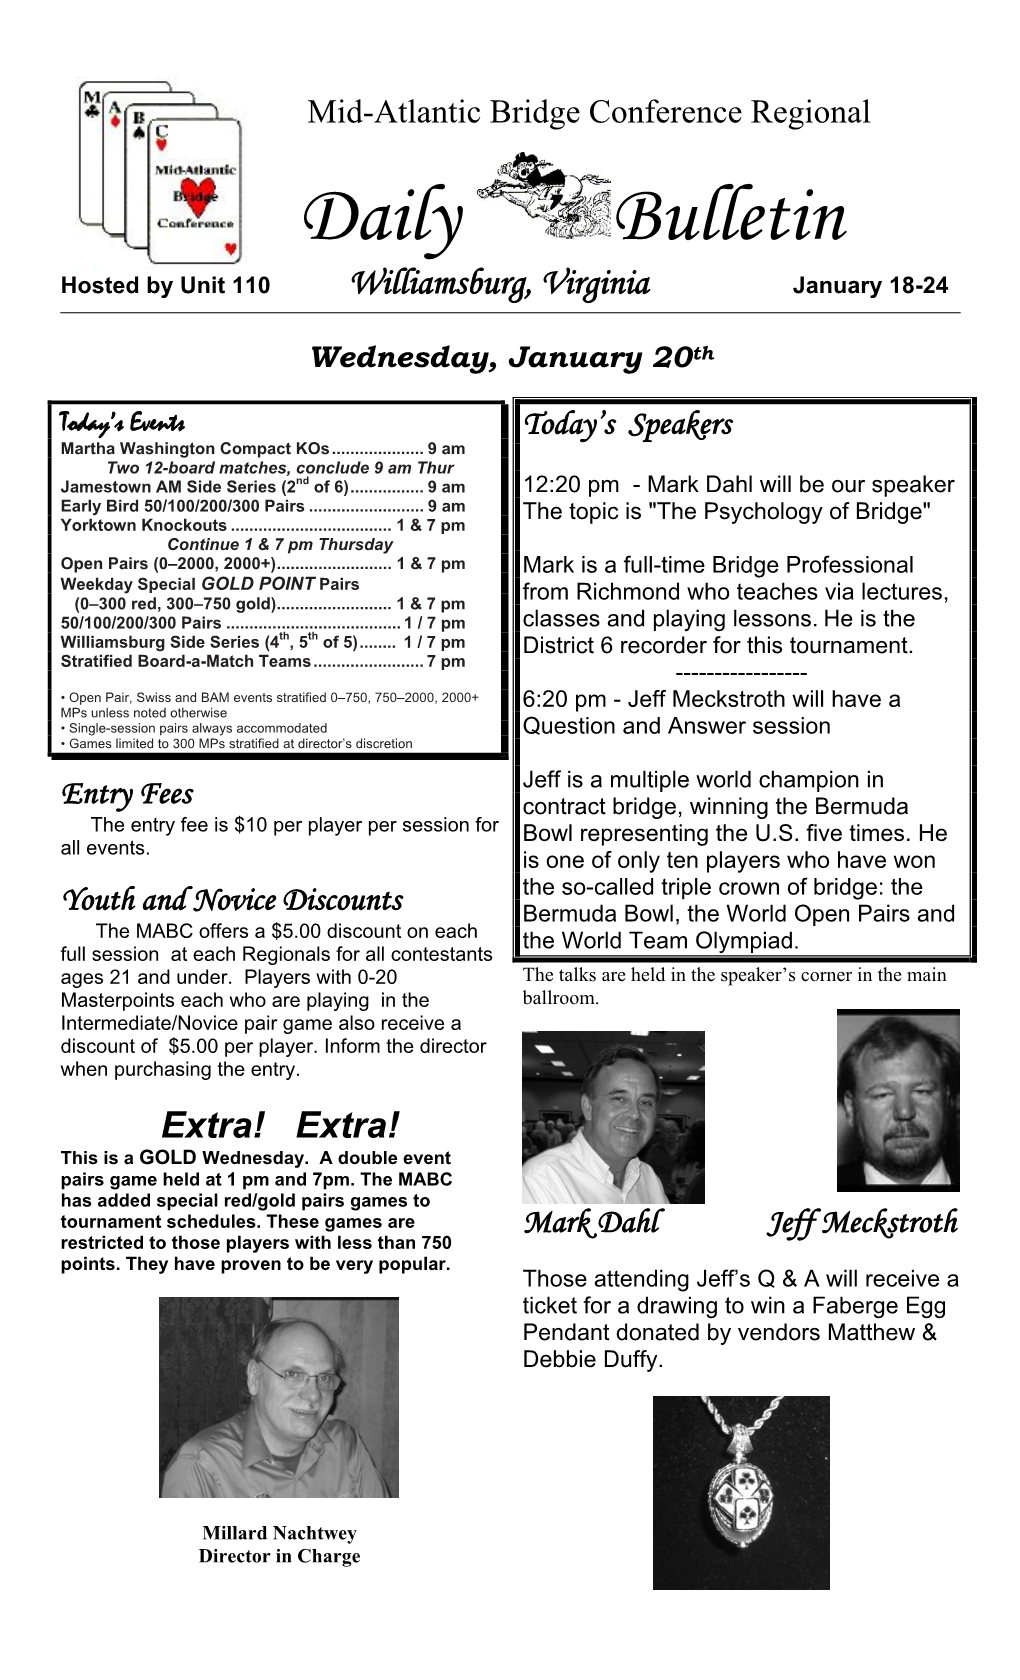 Daily Bulletin Hosted by Unit 110 Williamsburg, Virginia January 18-24